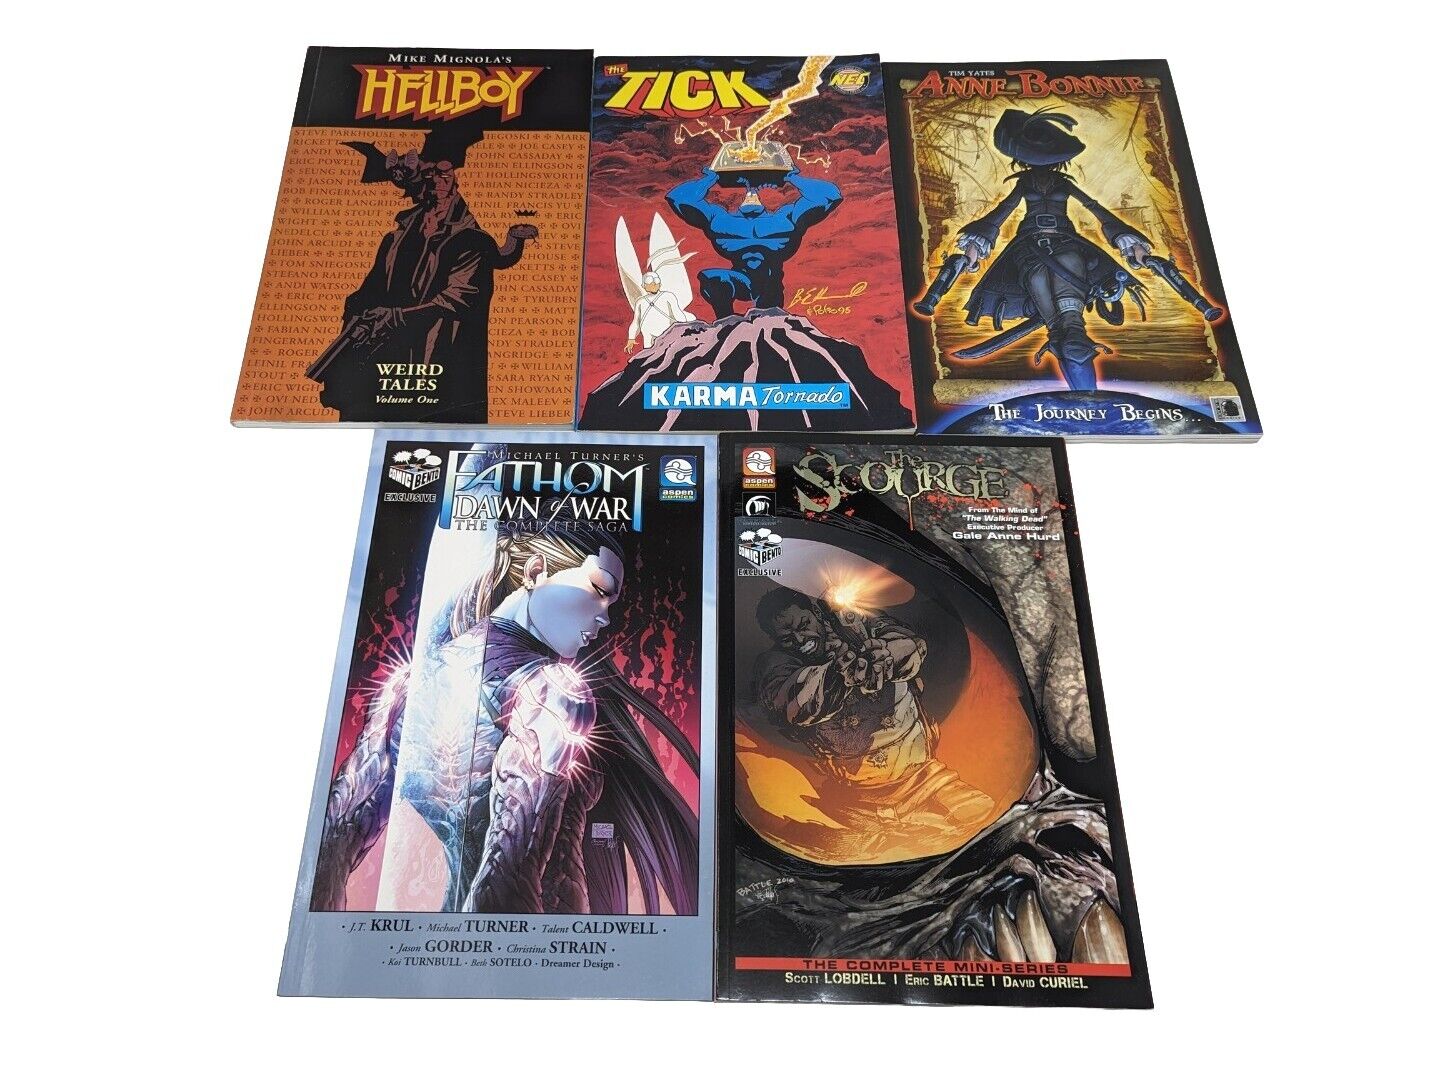 Graphic Novel Mixed Lot of 5: Hellboy, The Tick, Anne Bonnie, Fathom, Scourge 